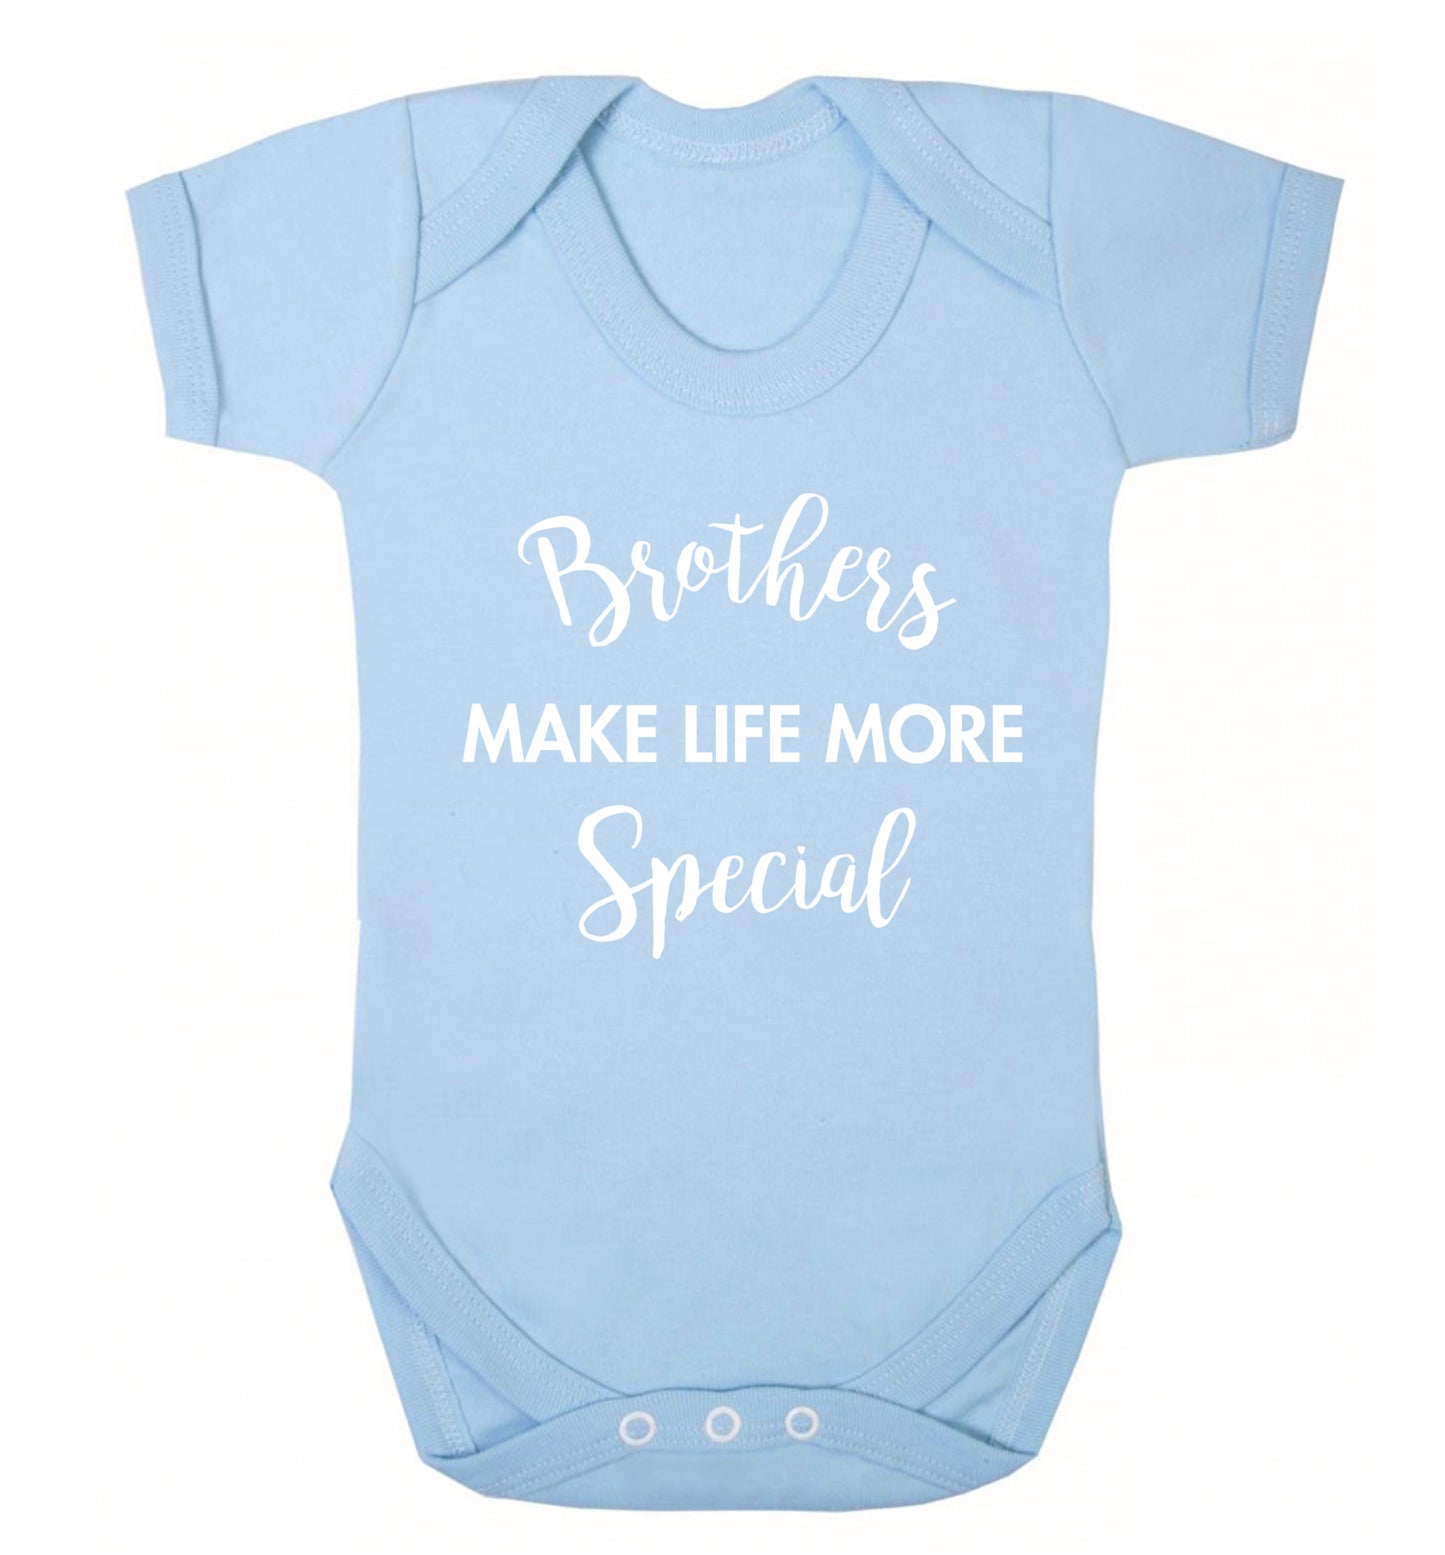 Brothers make life more special Baby Vest pale blue 18-24 months